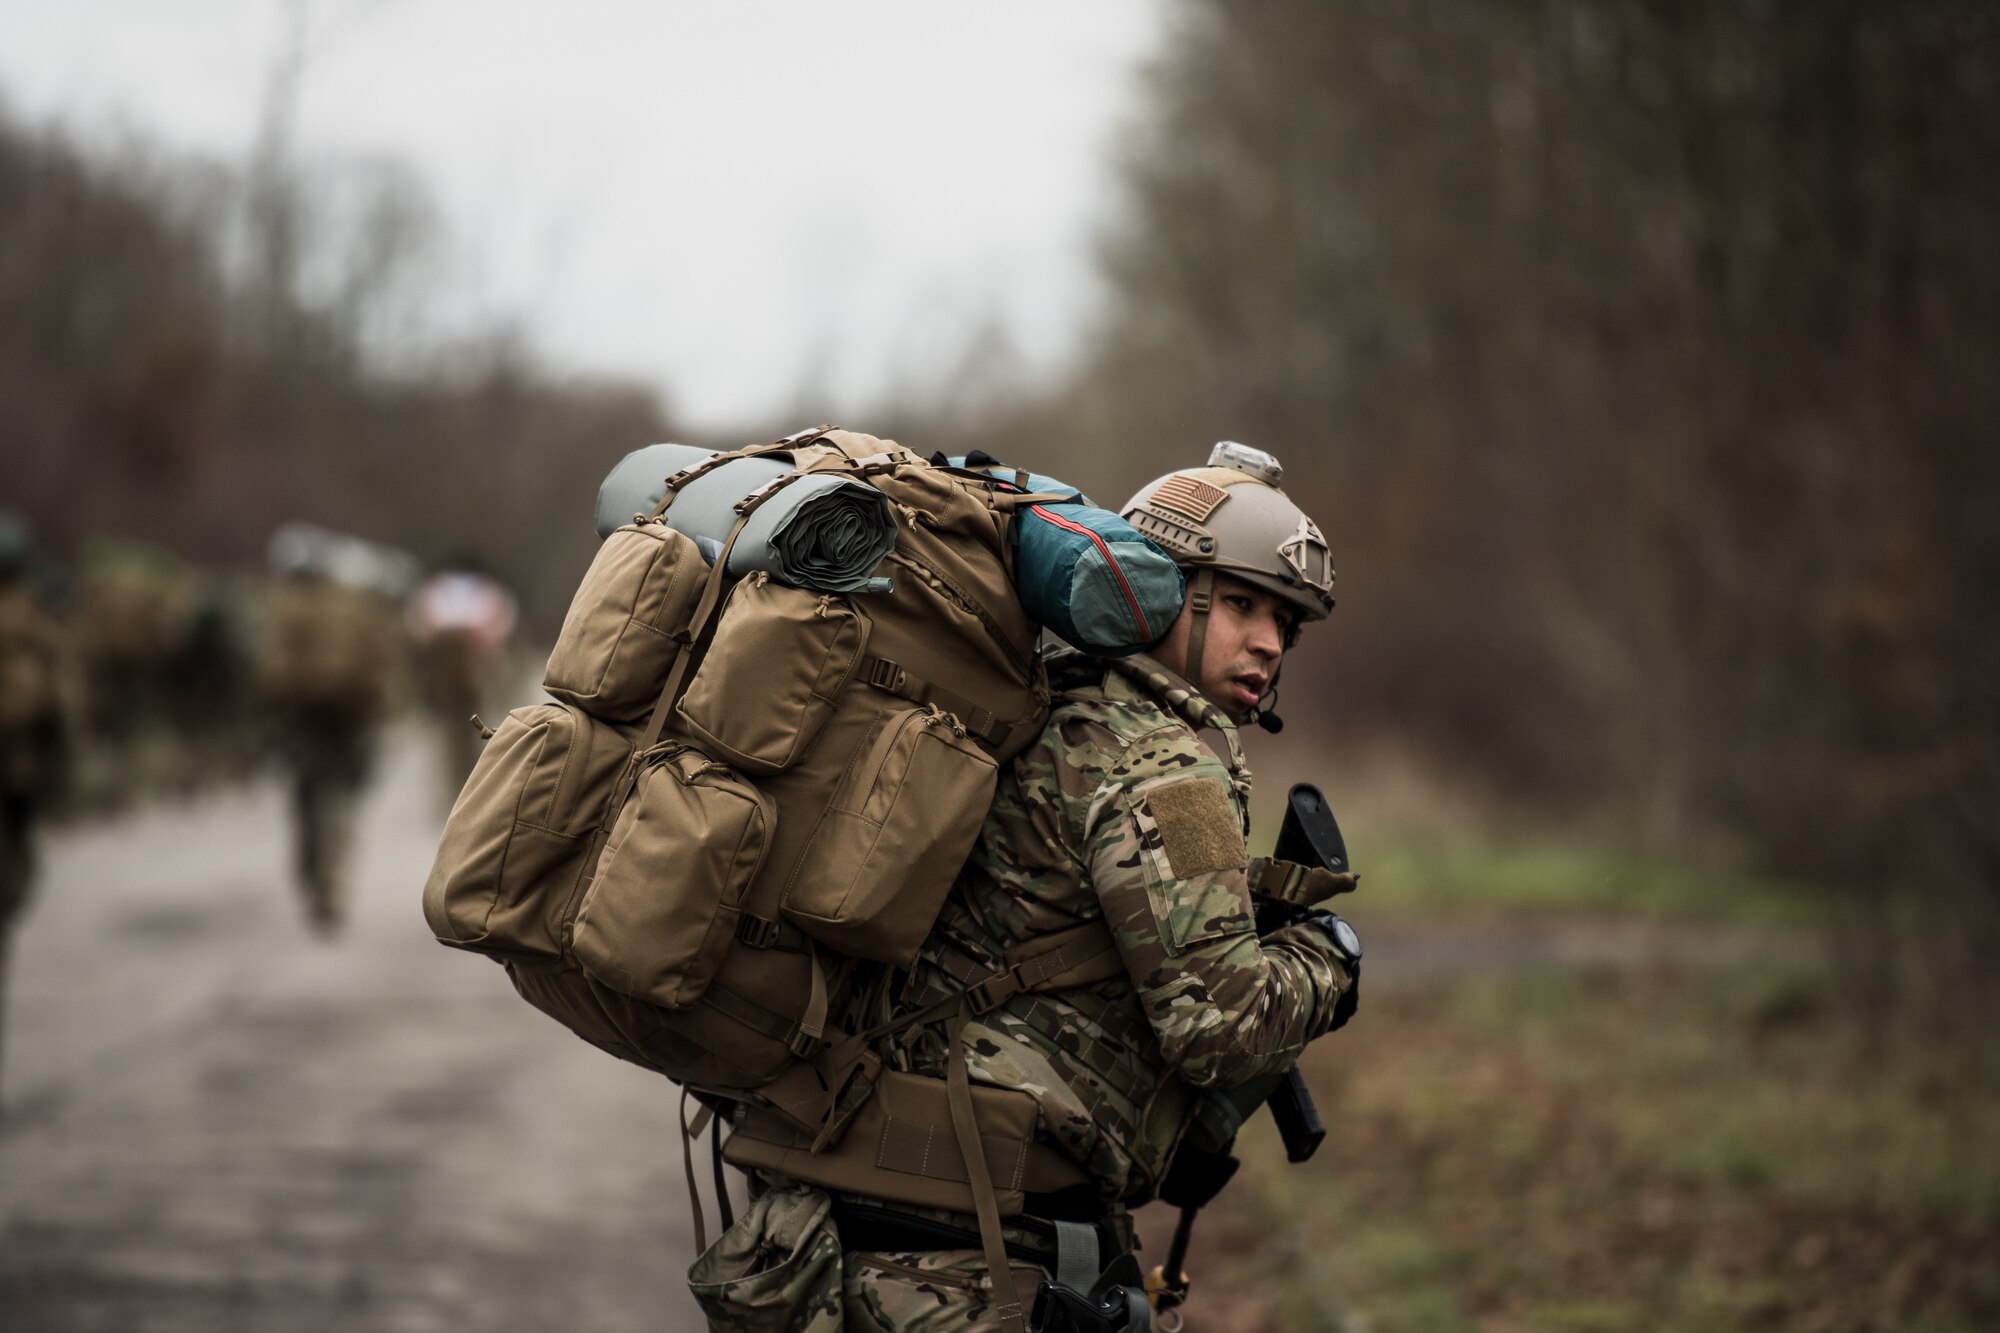 U.S. Air Force Tech. Sgt. Andrew Gibson, 435th Security Forces Squadron ground combat readiness training center course chief, pulls rear security while walking to a rally point during exercise Frozen Defender in Grostenquin, France, Jan. 14, 2020. Frozen Defender tests the squadron’s capabilities in a contested environment under harsh conditions. Volunteers from the 86th Security Forces Squadron participated in the exercise to provide opposition forces for the 435th SFS Defenders. The opposition forces concealed themselves in the wooded areas surrounding the site. (U.S. Air Force photo by Staff Sgt. Devin Boyer)